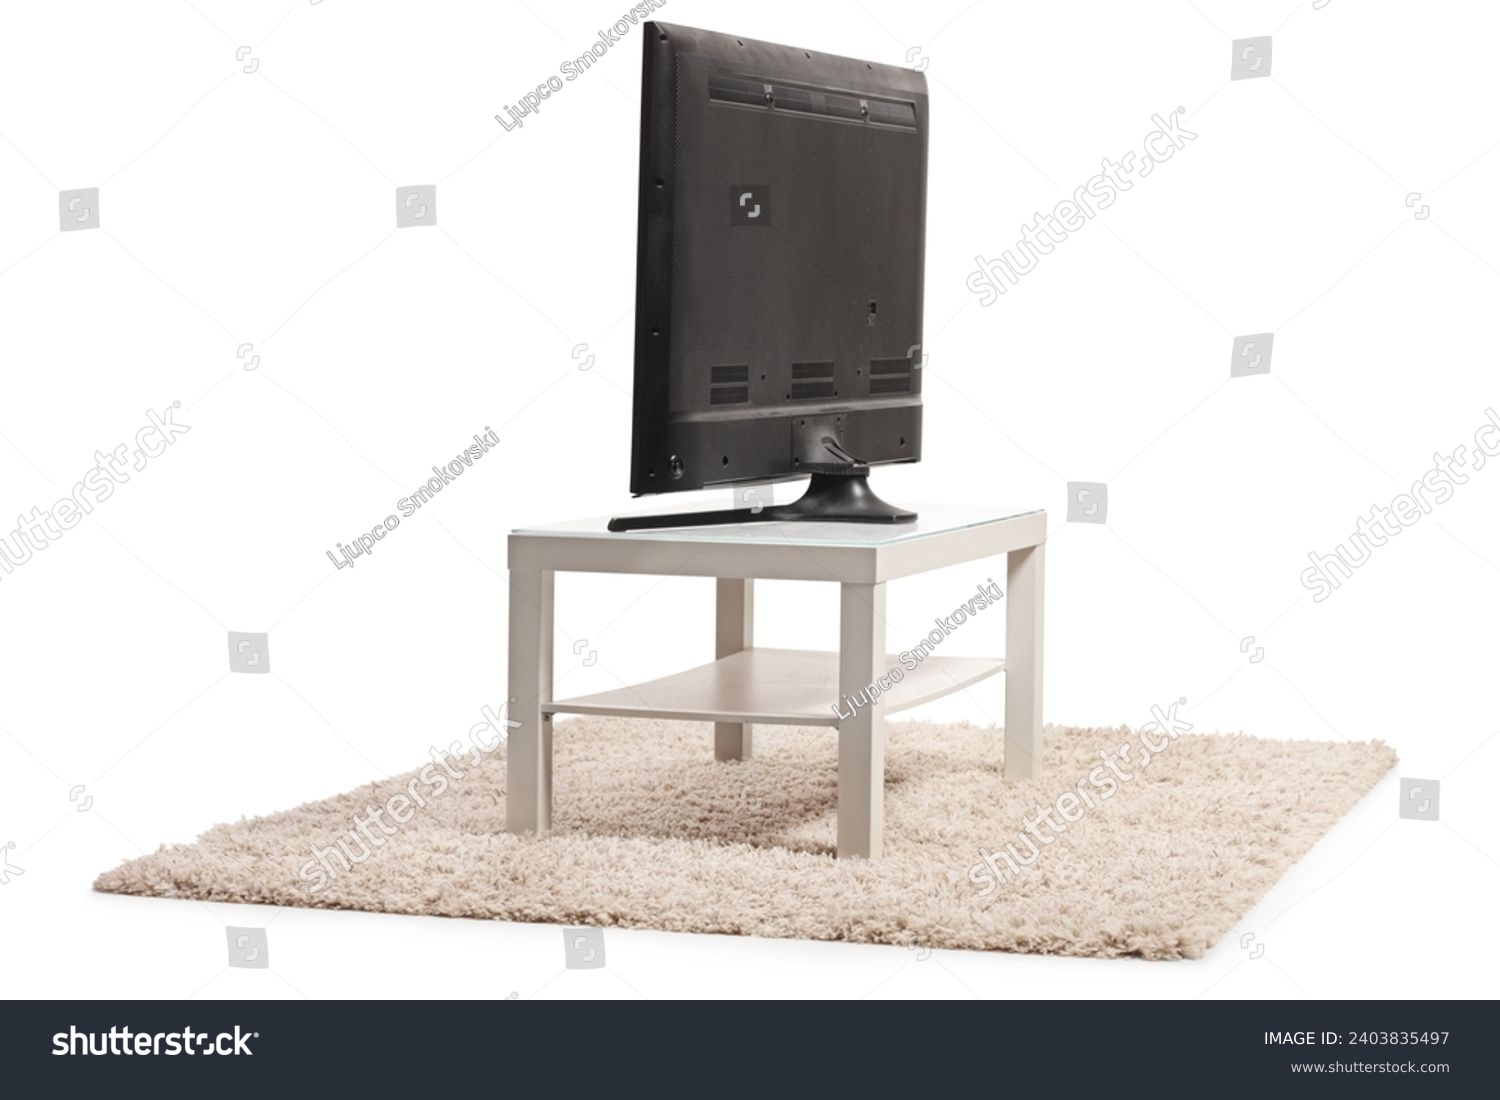 Rear view shot of a tv on a white table isolated on white background #2403835497